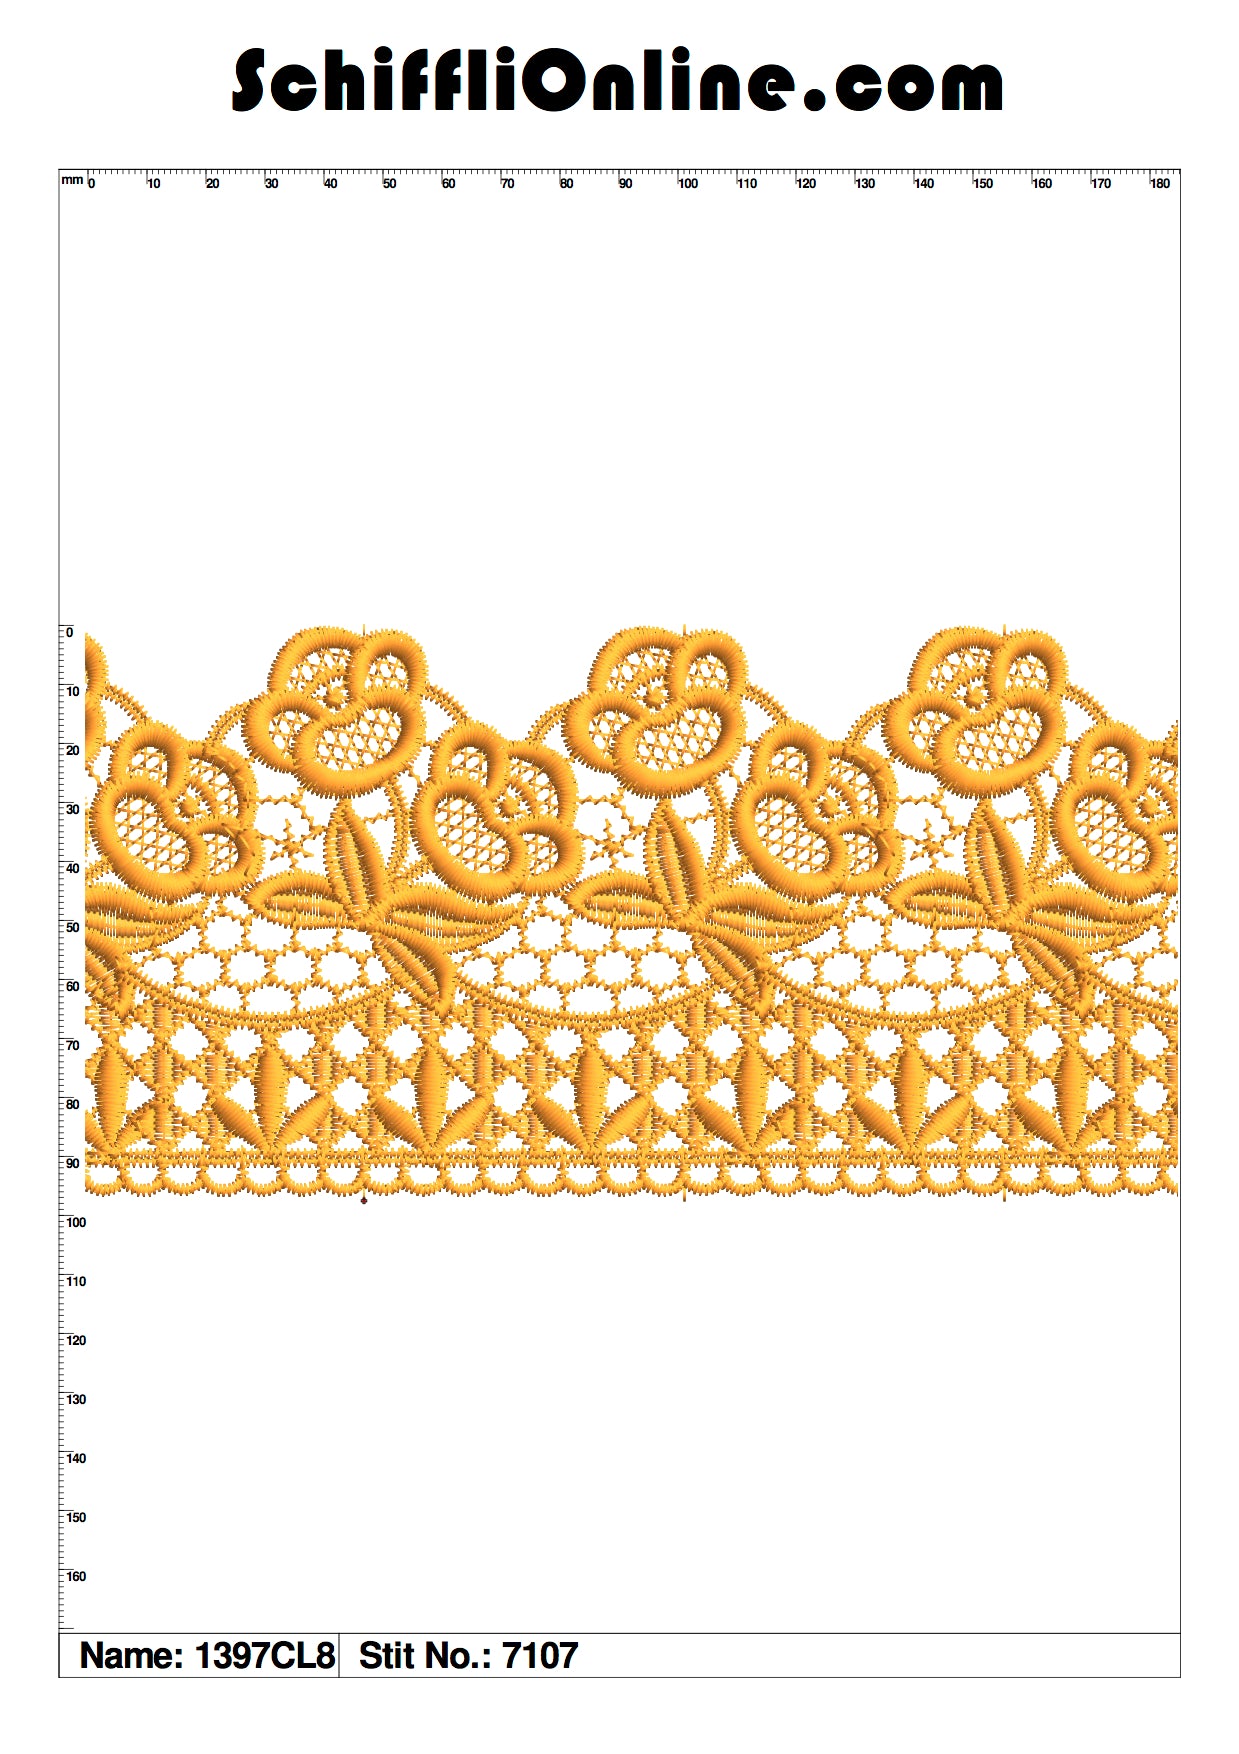 Book 144 CHEMICAL LACE 8X4 50 DESIGNS